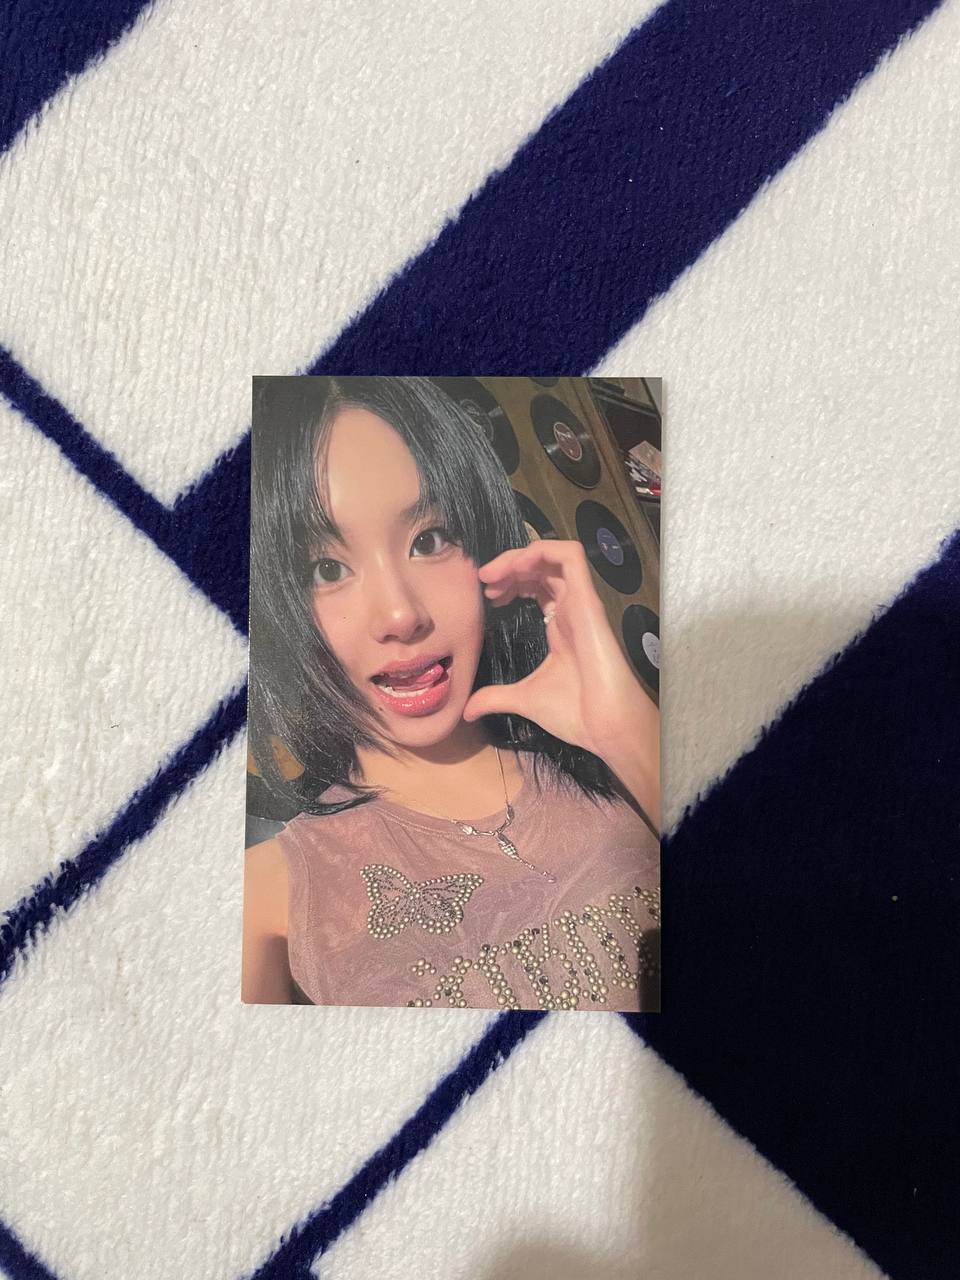 TWICE - 2023 Fanmeeting Once Again MD (Trading Cards)